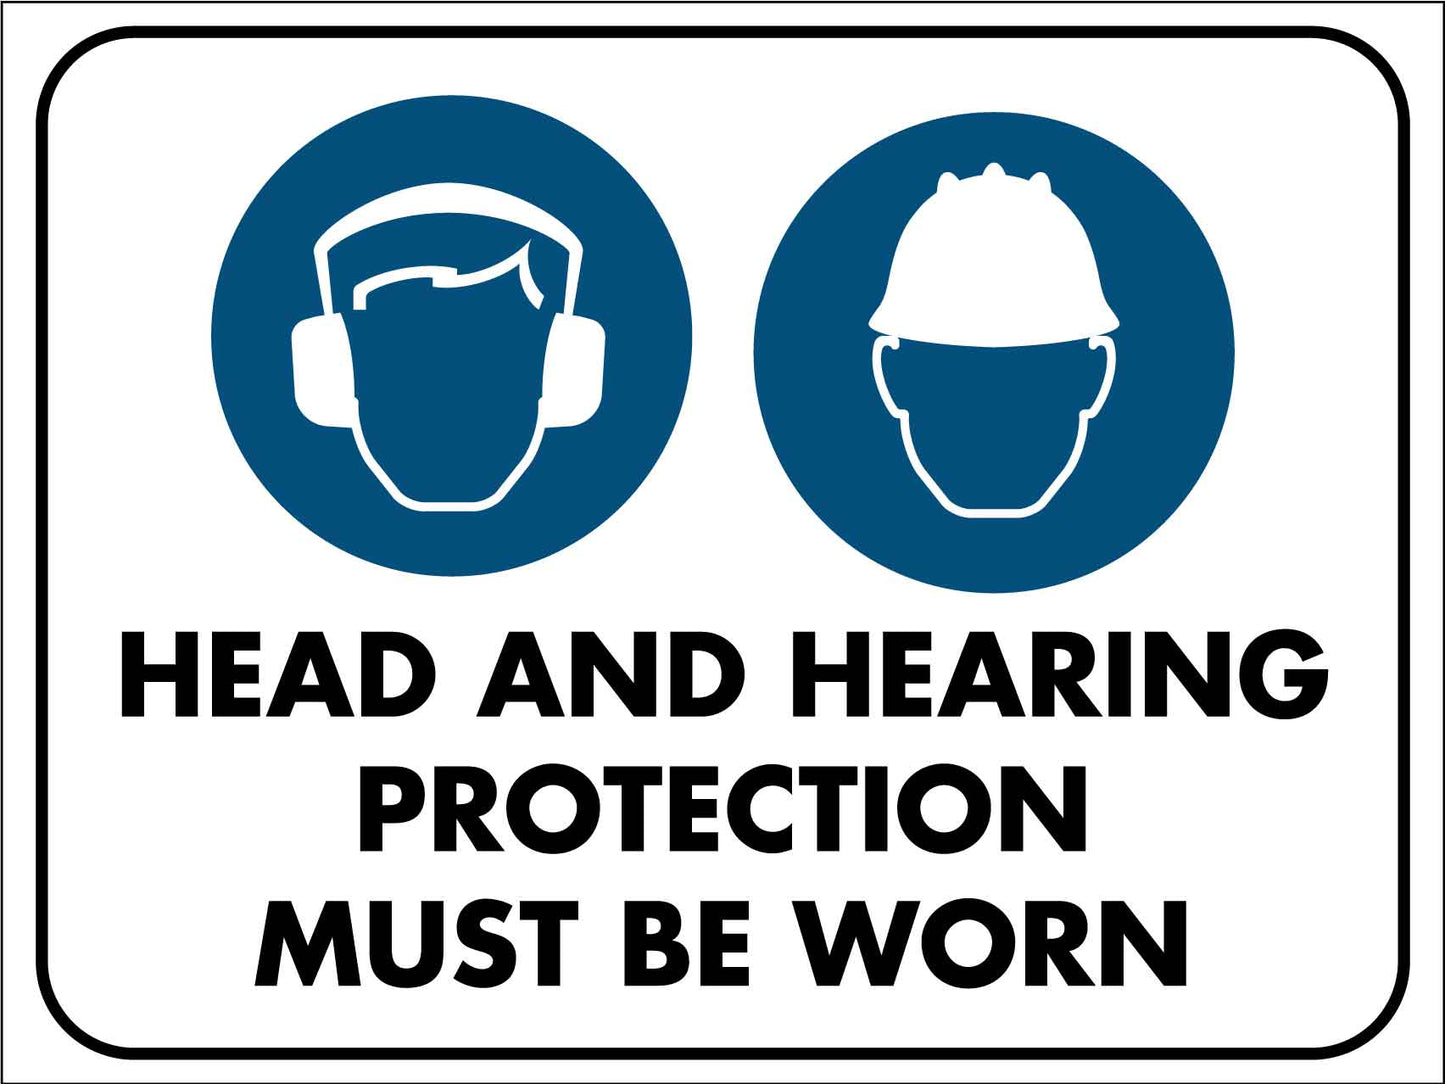 Head and Hearing Protection Must Be Worn Safety Sign